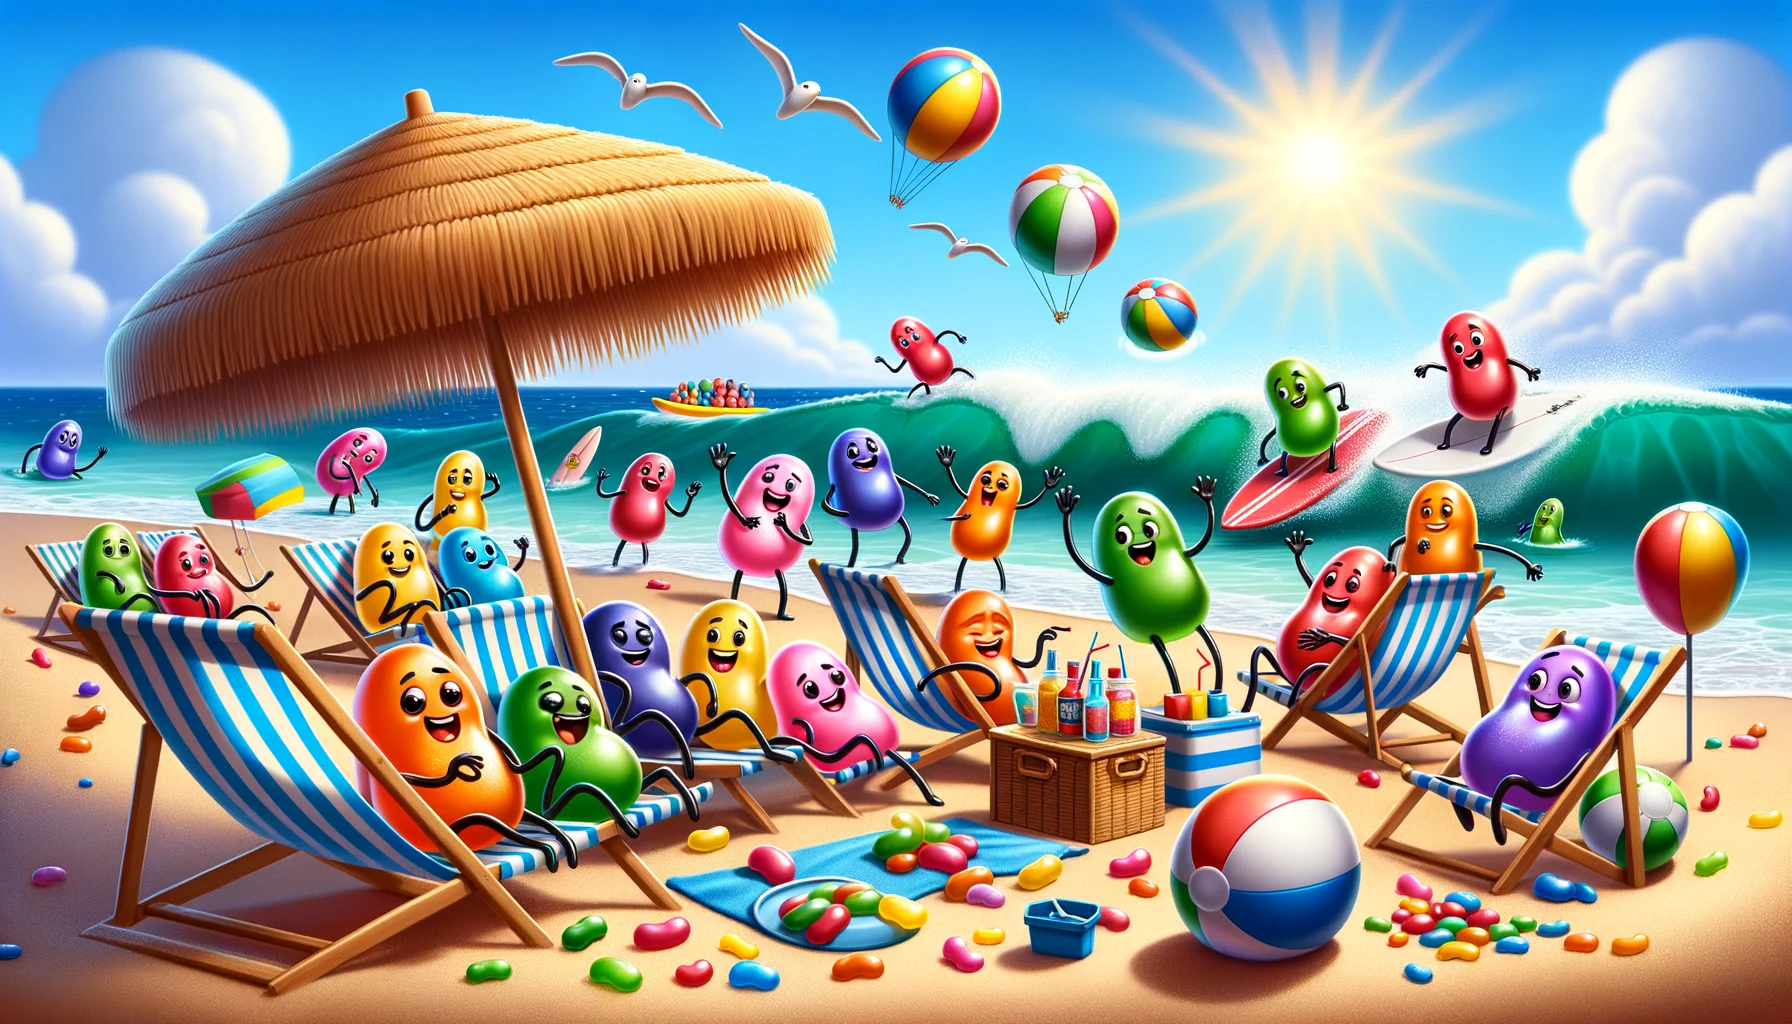 Illustrate a humorous and realistic depiction of various colored jelly beans engaging in a perfect summer day scenario. They are all having fun enjoying a beach scene, with some jelly beans lounging on beach chairs under straw umbrellas, while others are bravely riding the waves on surfboards. A few ambitious jelly beans are trying to build a sandcastle, while some are playing beach volleyball. Make sure to include the warmth of the bright sun overhead, with colorful beach balls bouncing around and the endless blue of the sea in the background.